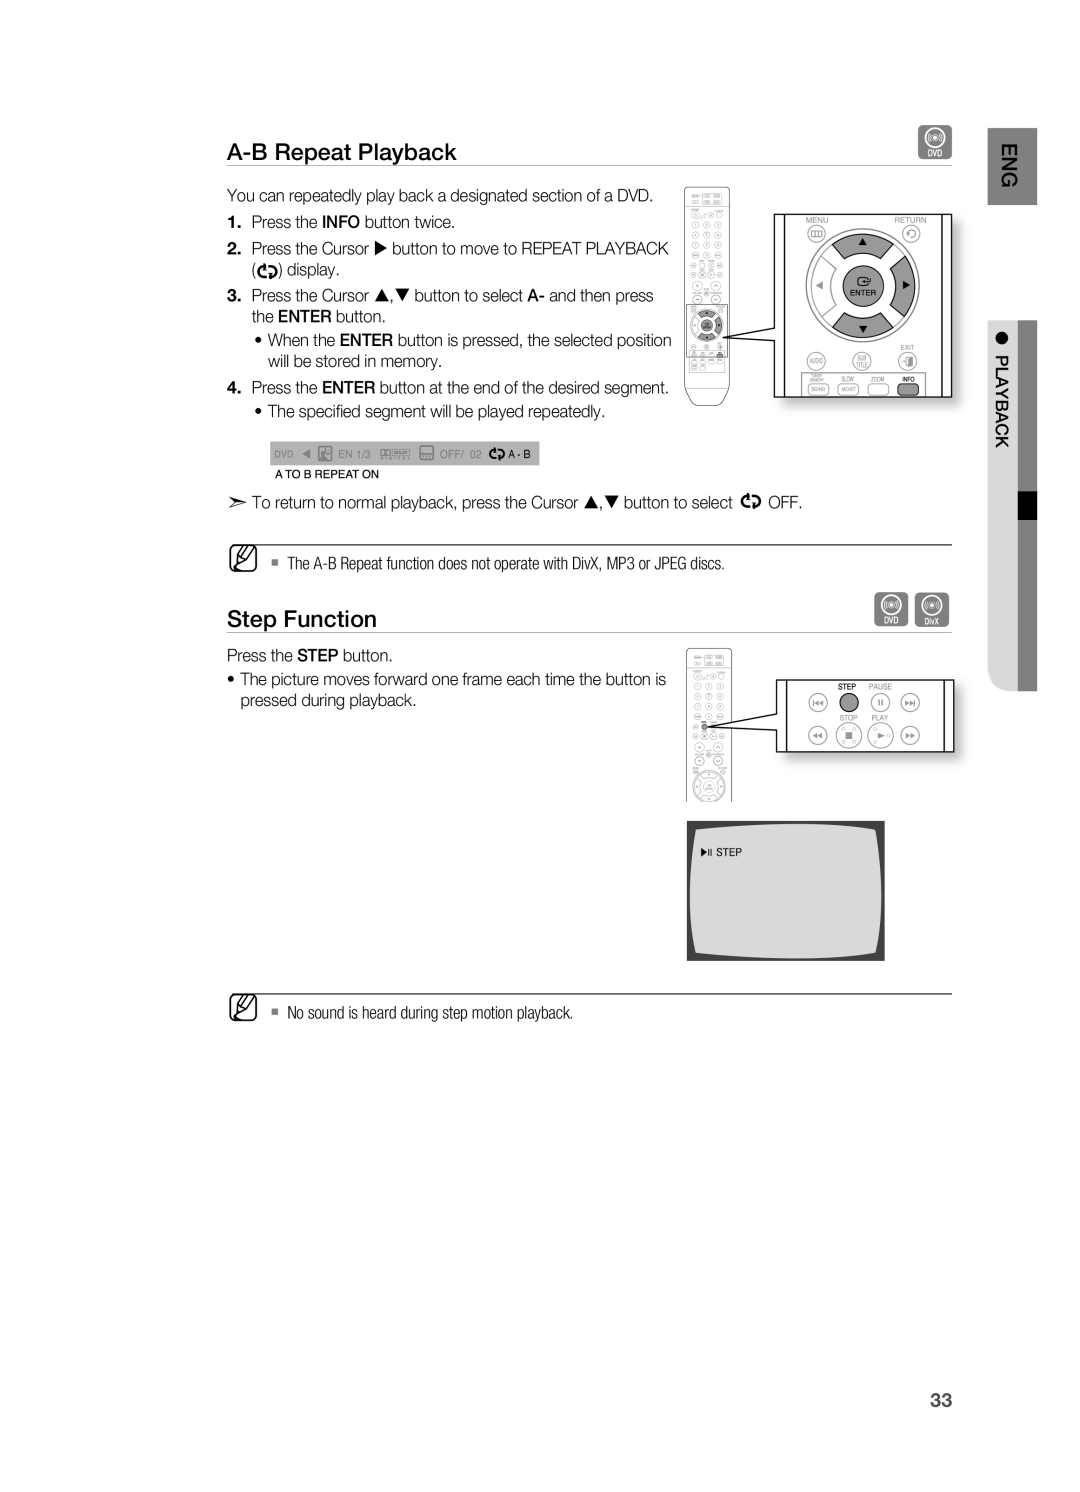 Samsung HT-A100 user manual A-Brepeat Playback, Step Function 